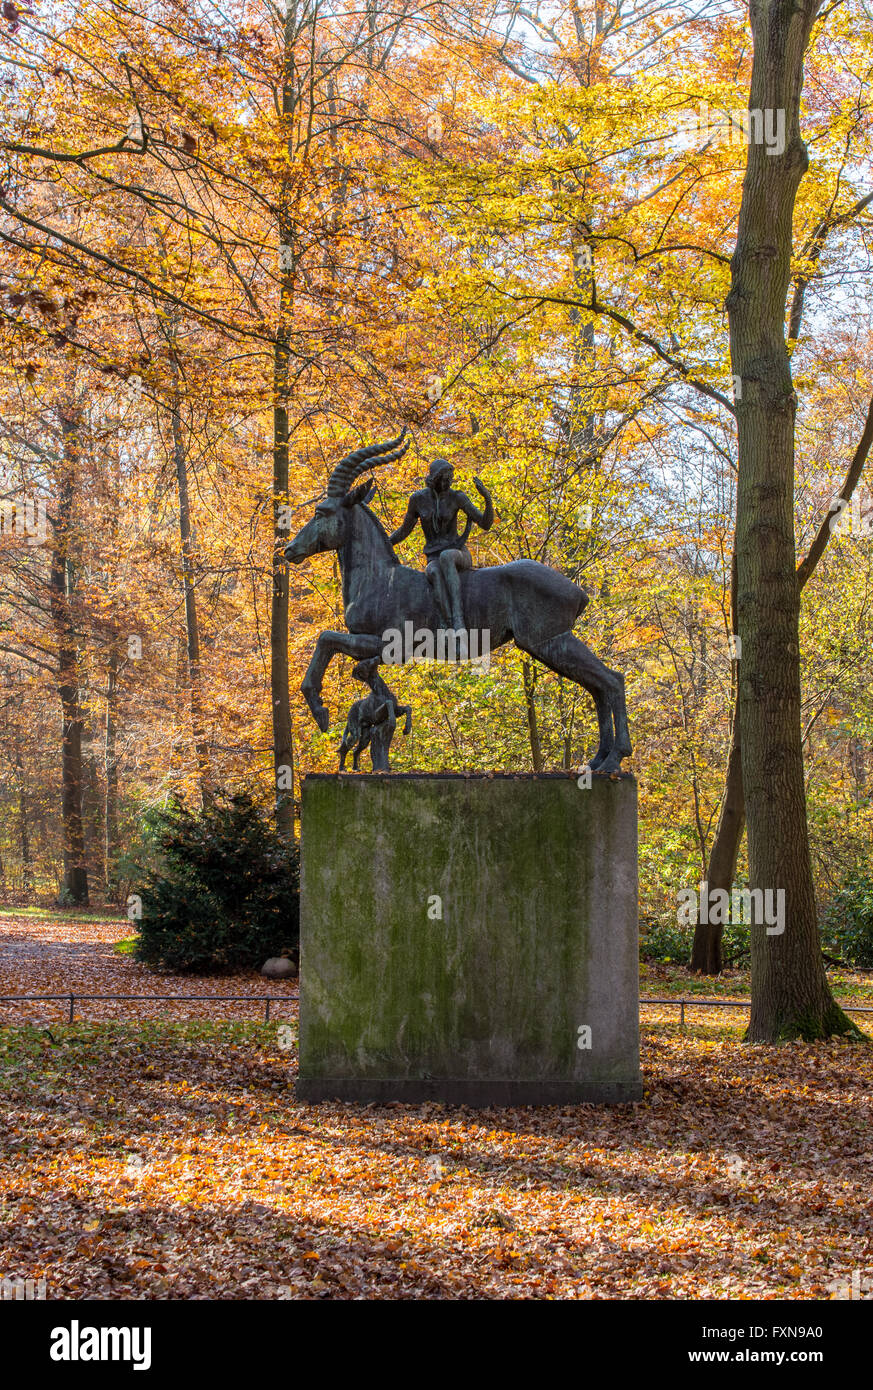 Sculpture of the mythical creature with horsewoman and dog created by Ludwig Vierthaler, Eilenriede, Hannover Stock Photo